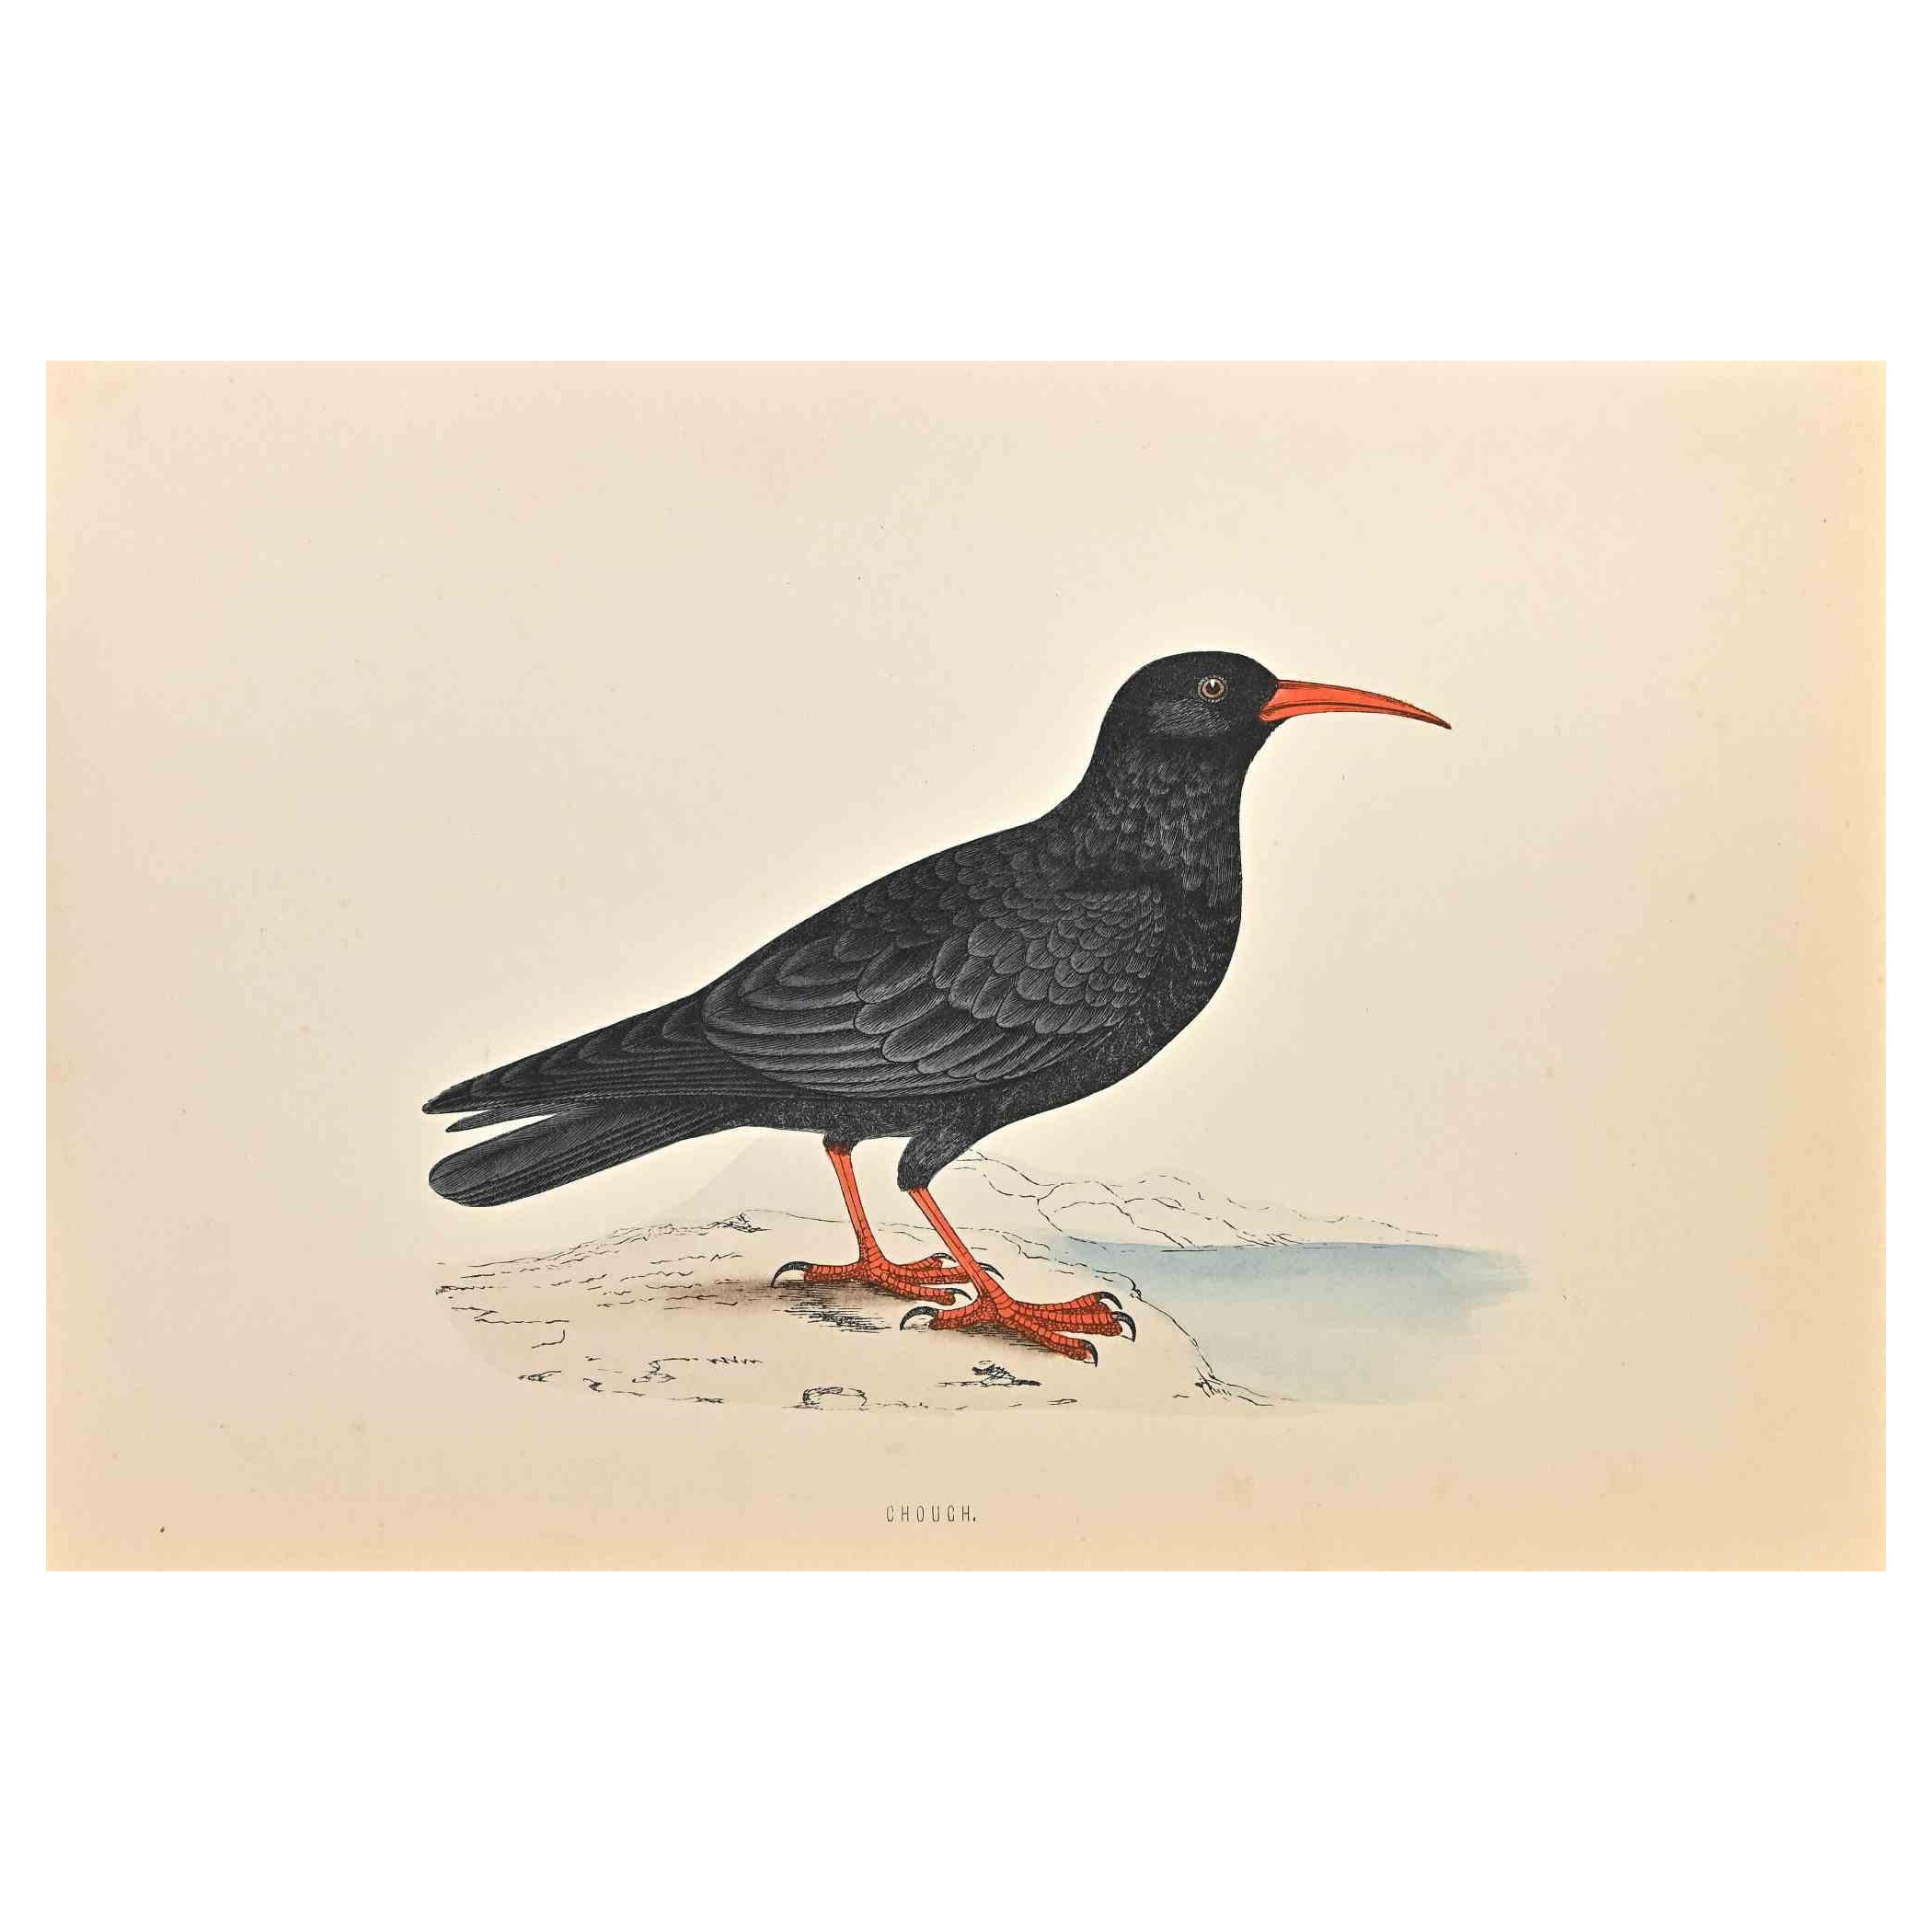 Chough is a modern artwork realized in 1870 by the British artist Alexander Francis Lydon (1836-1917).

Woodcut print on ivory-colored paper.

Hand-colored, published by London, Bell & Sons, 1870.  

The name of the bird is printed on the plate.